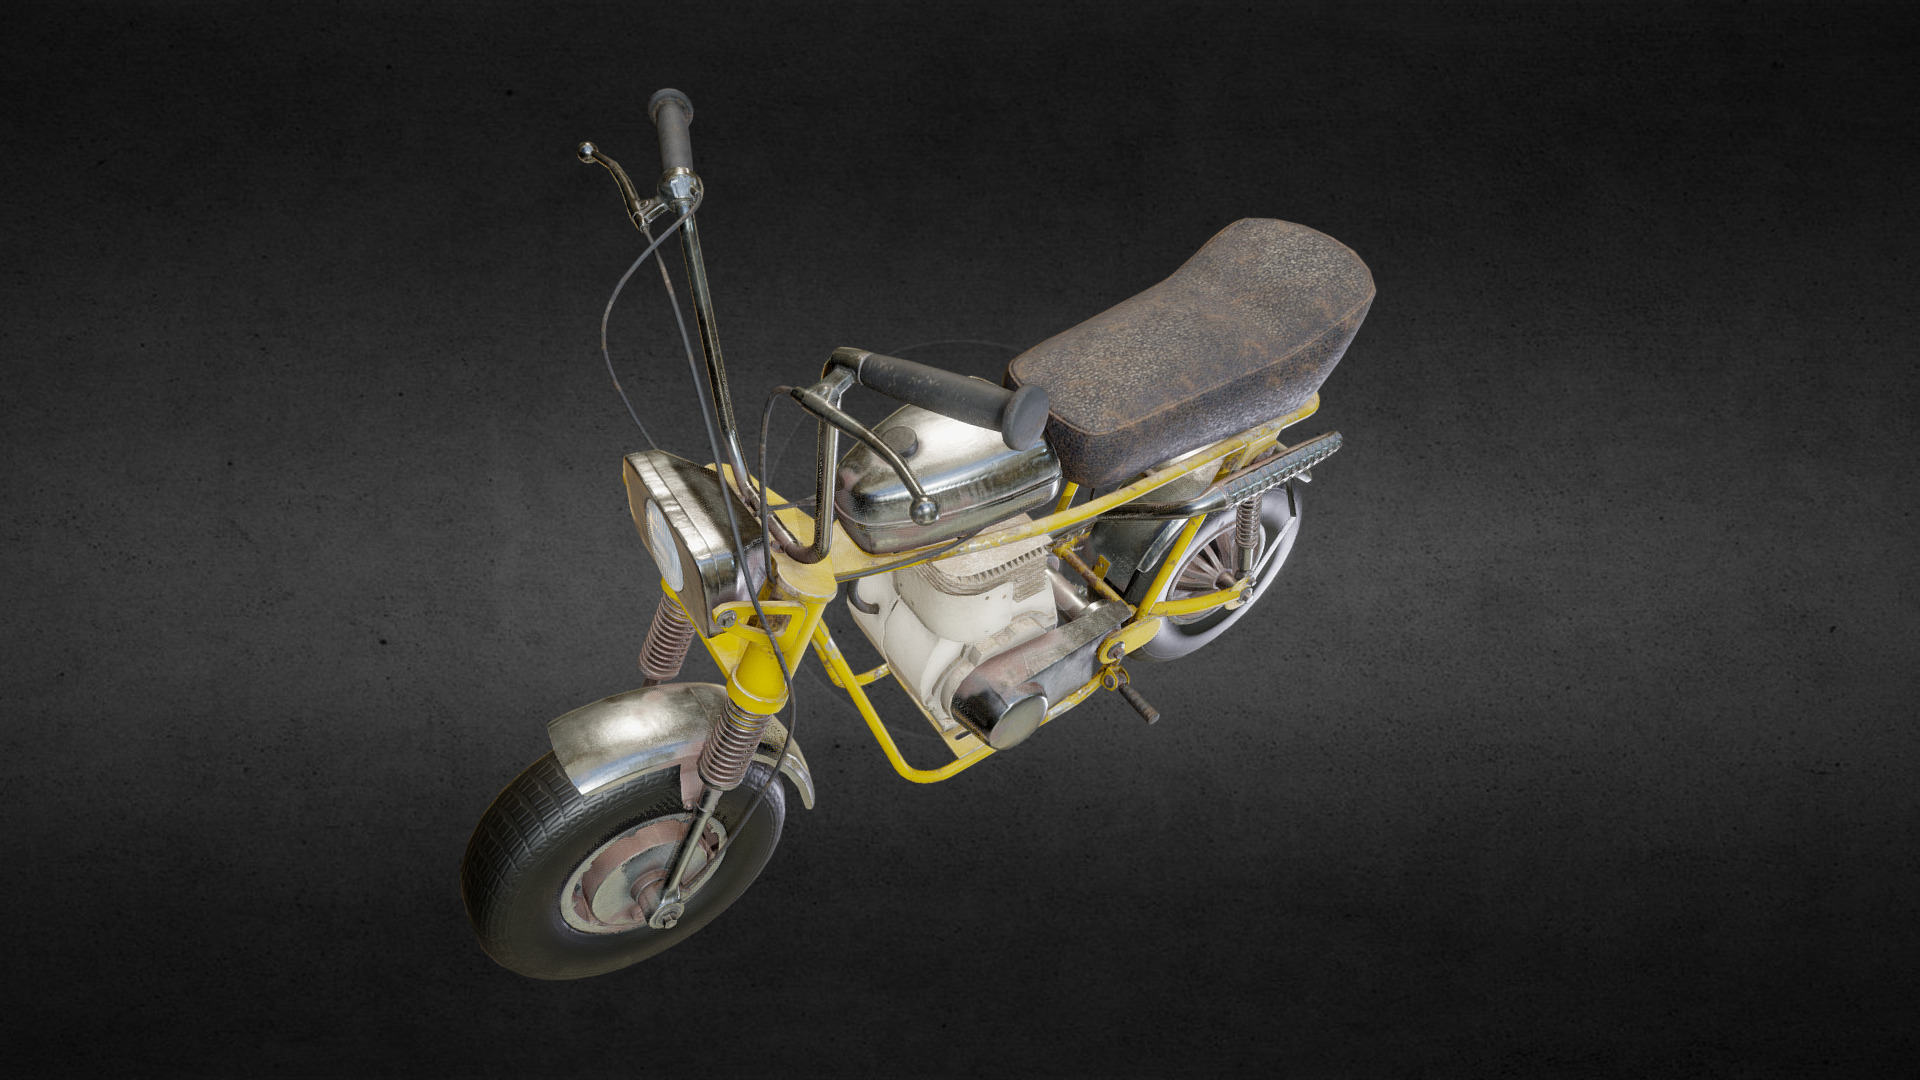 3D model Rupp Roadster Minibike - This is a 3D model of the Rupp Roadster Minibike. The 3D model is about a motorcycle parked on a black surface.